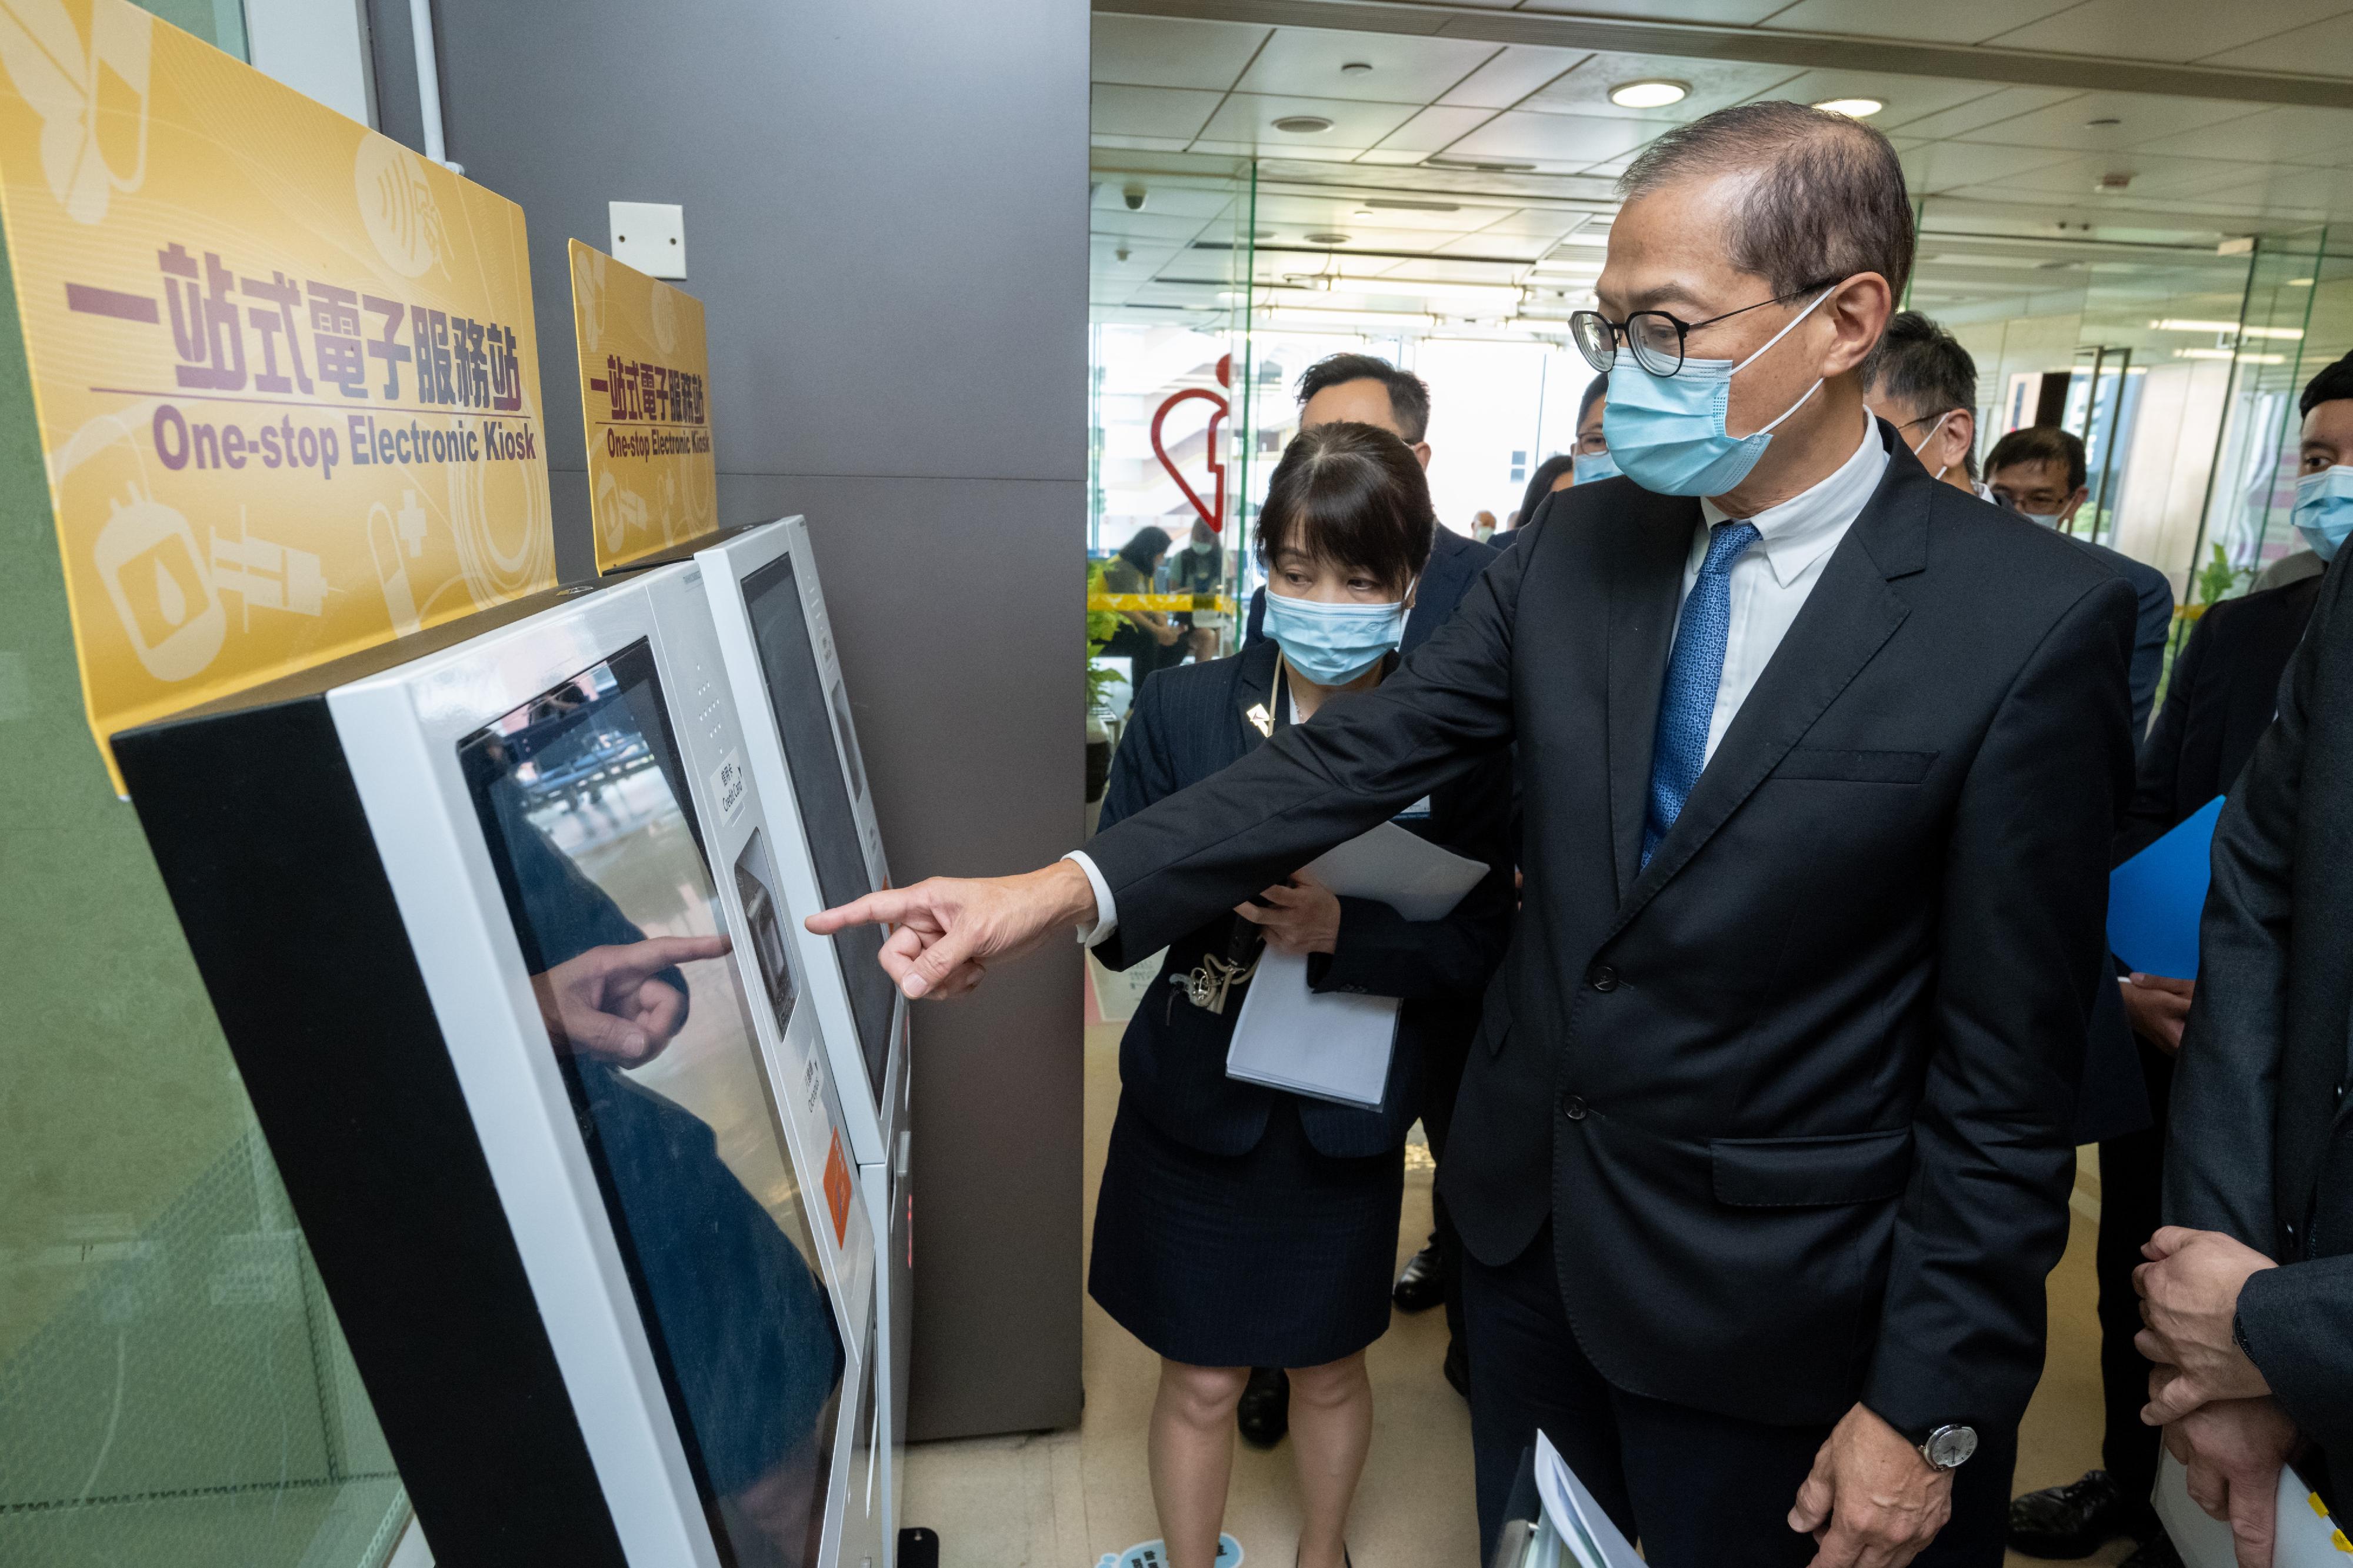 The Secretary for Health, Professor Lo Chung-mau (right), visits the Tin Shui Wai (Tin Yip Road) Community Health Centre today (July 20) to learn more about the function of the one-stop electronic kiosk.